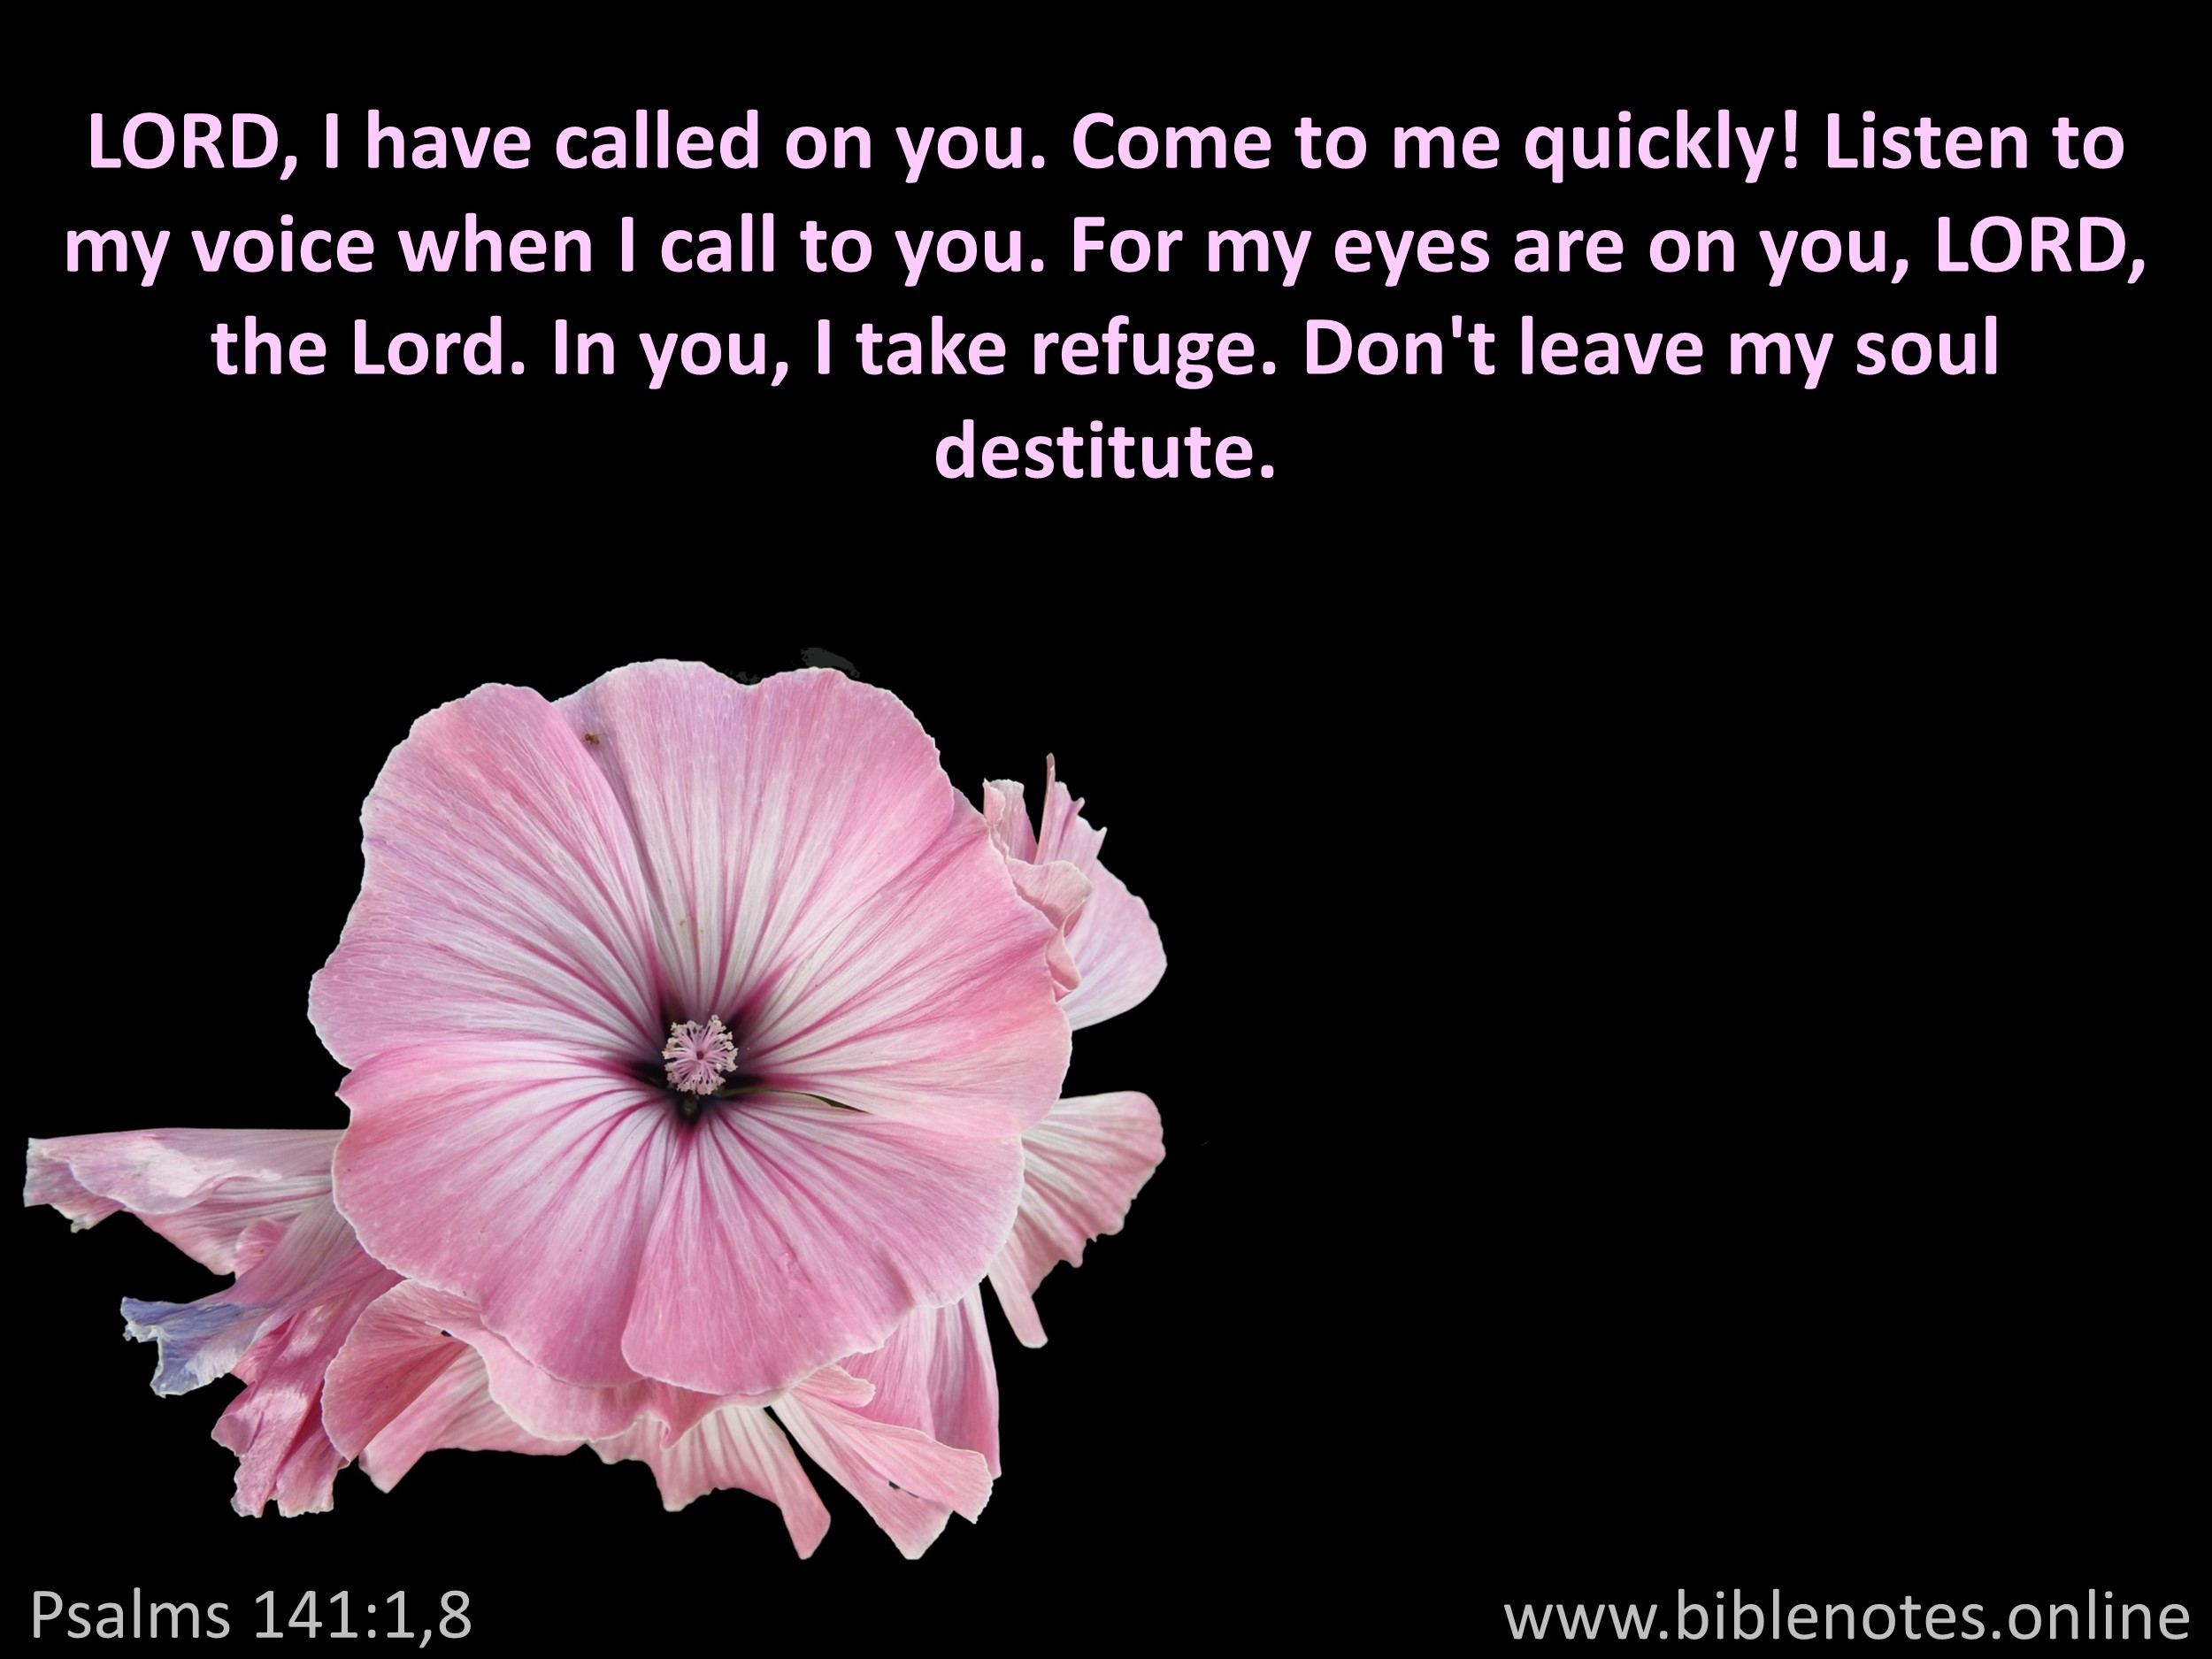 Bible Verse from Psalms Chapter 141